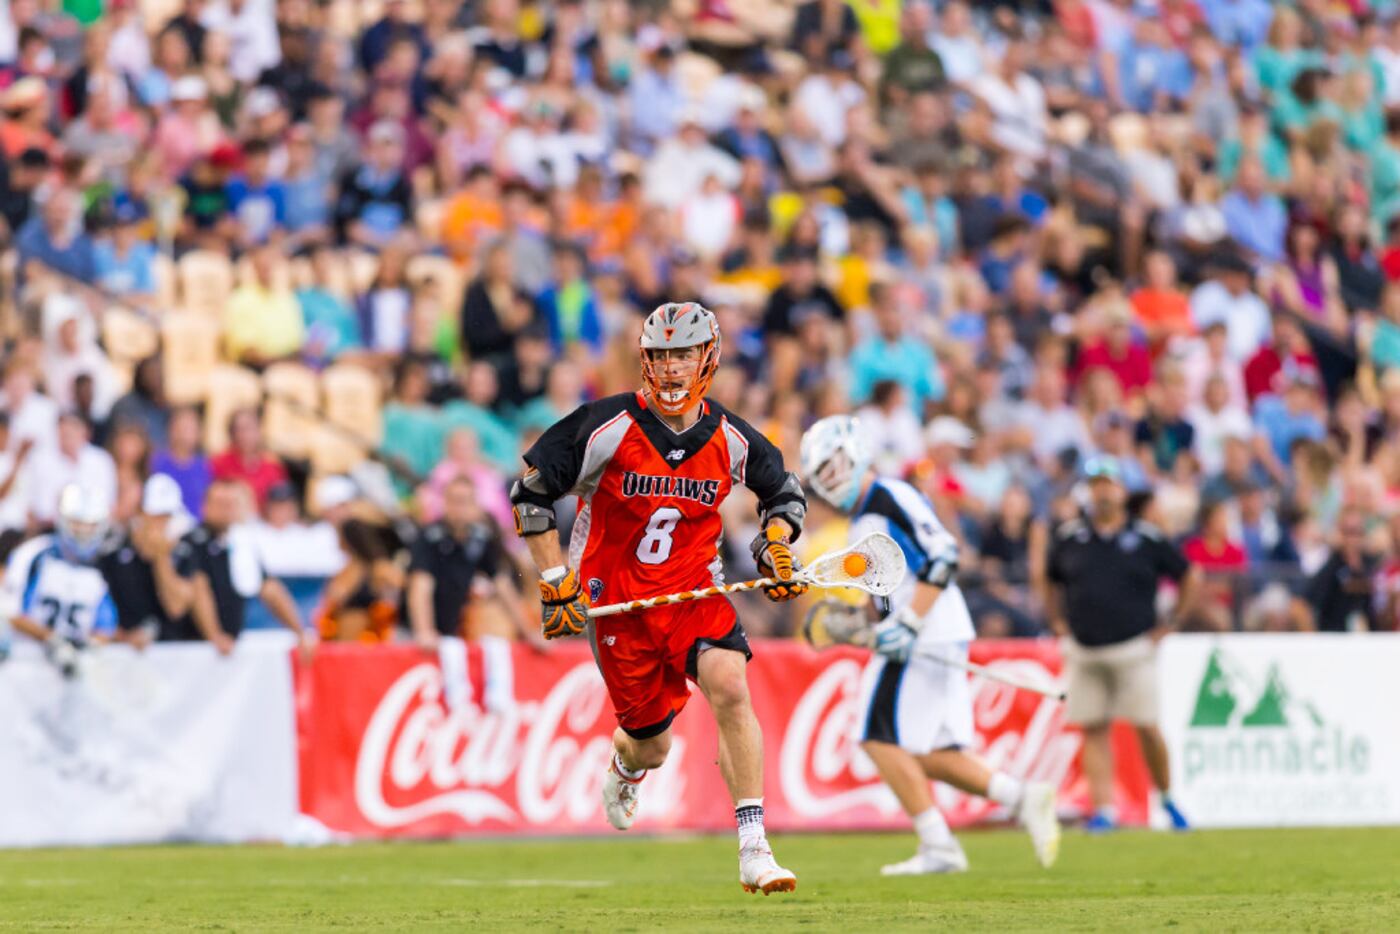 The Denver Outlaws beat the Ohio Machine 19-18 in last year's Major League Lacrosse...